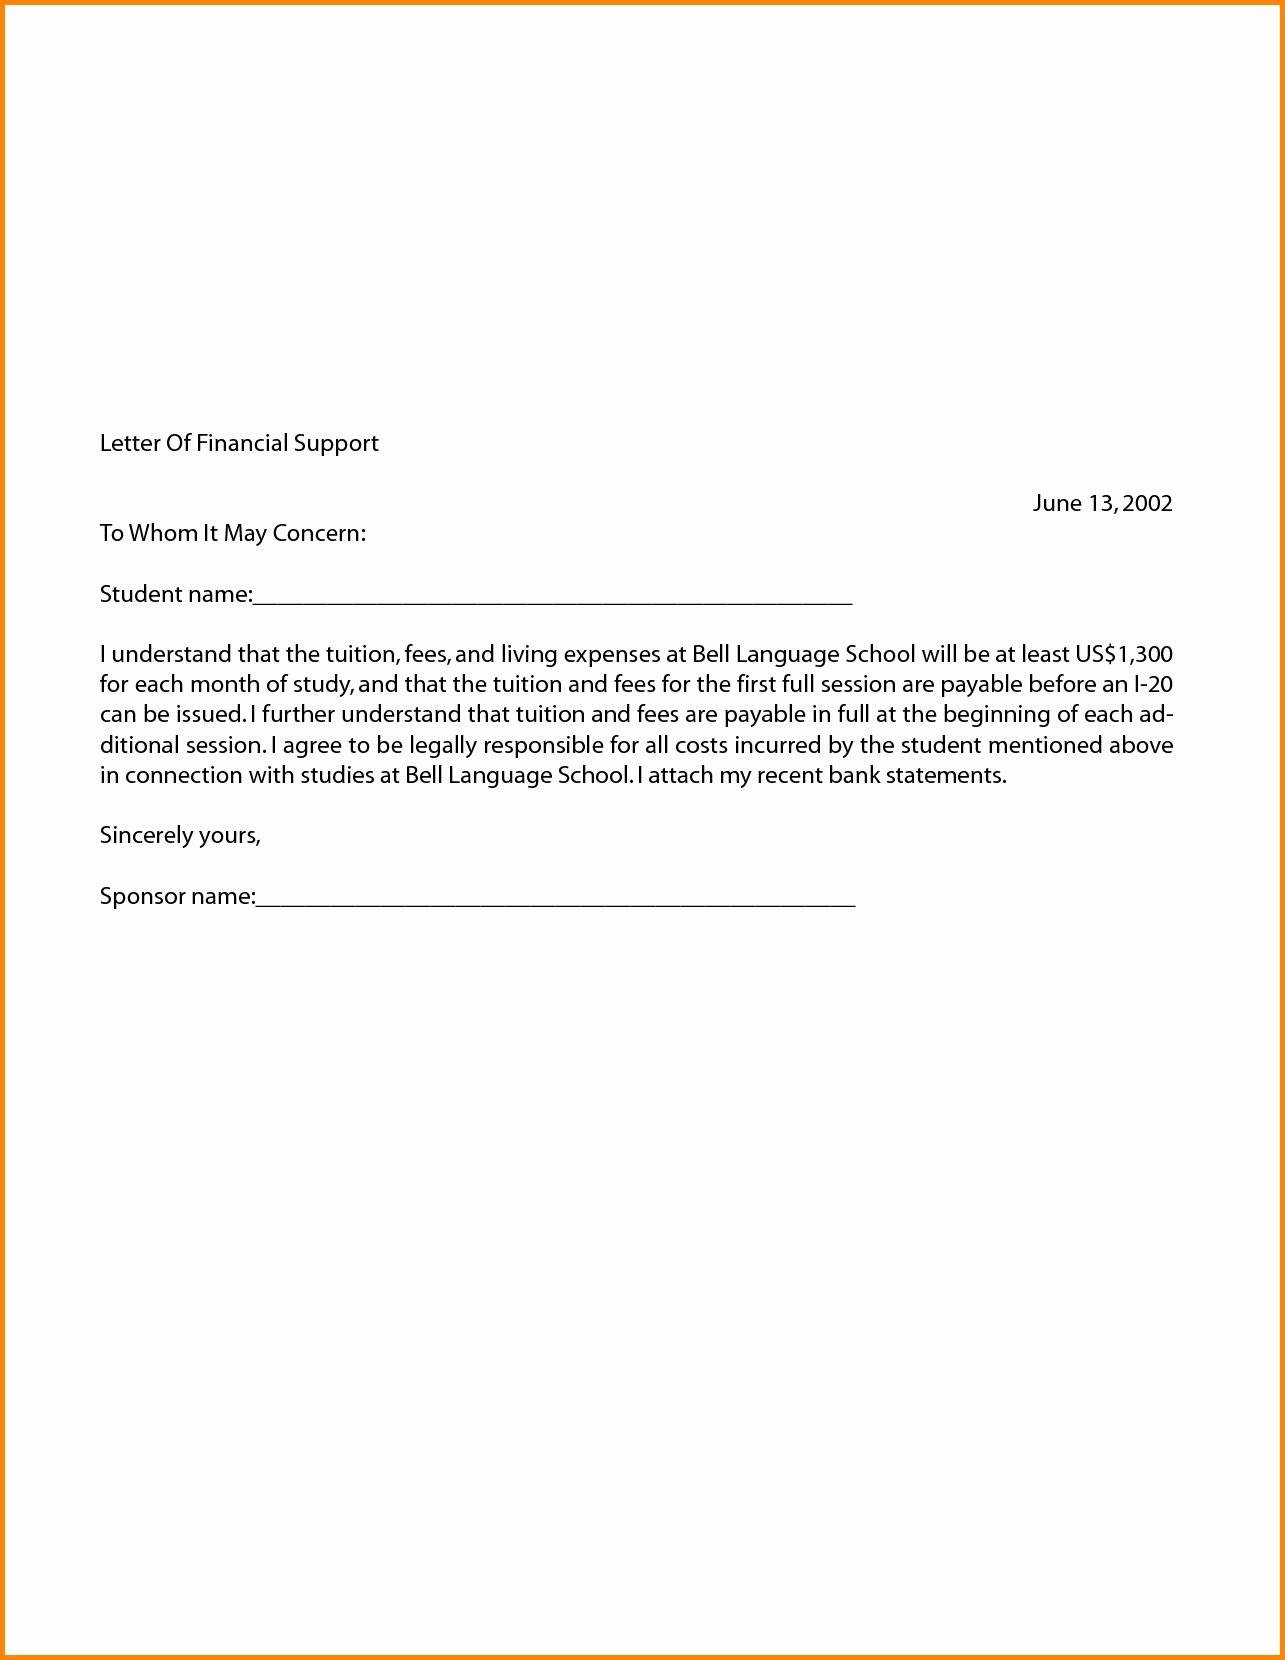 Sample Letter Of Financial Support New Letter Financial Support Template